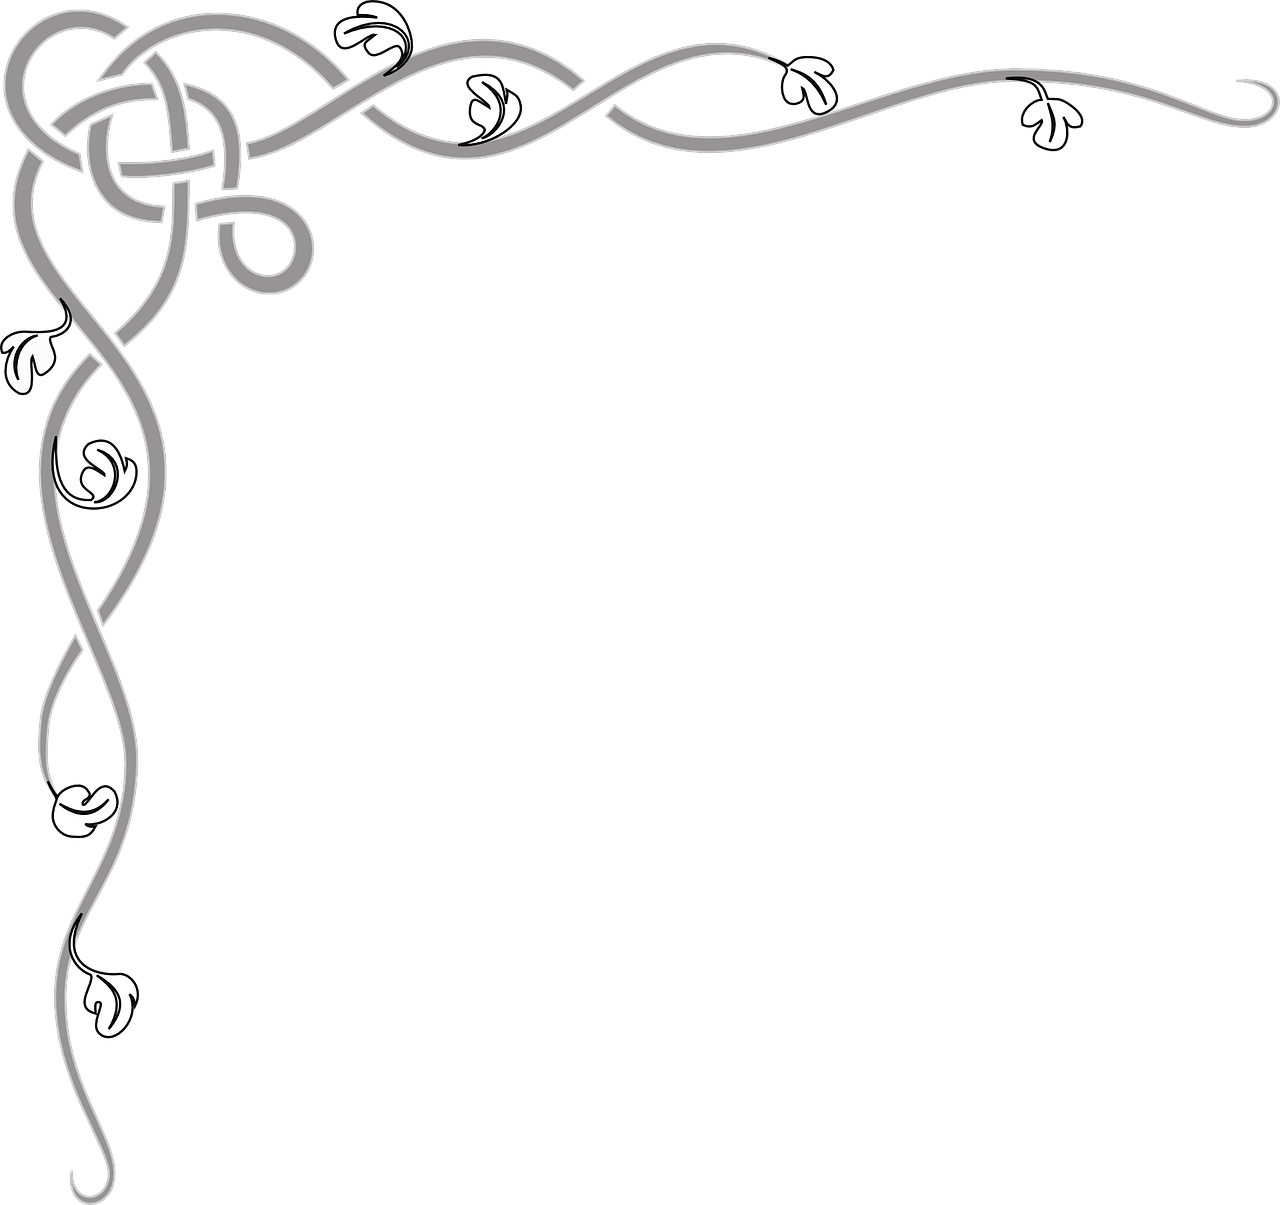 a black and white picture of a decorative frame, a digital rendering, inspired by Ásgrímur Jónsson, art nouveau, vines and thorns, black backround. inkscape, rose twining, dark. no text